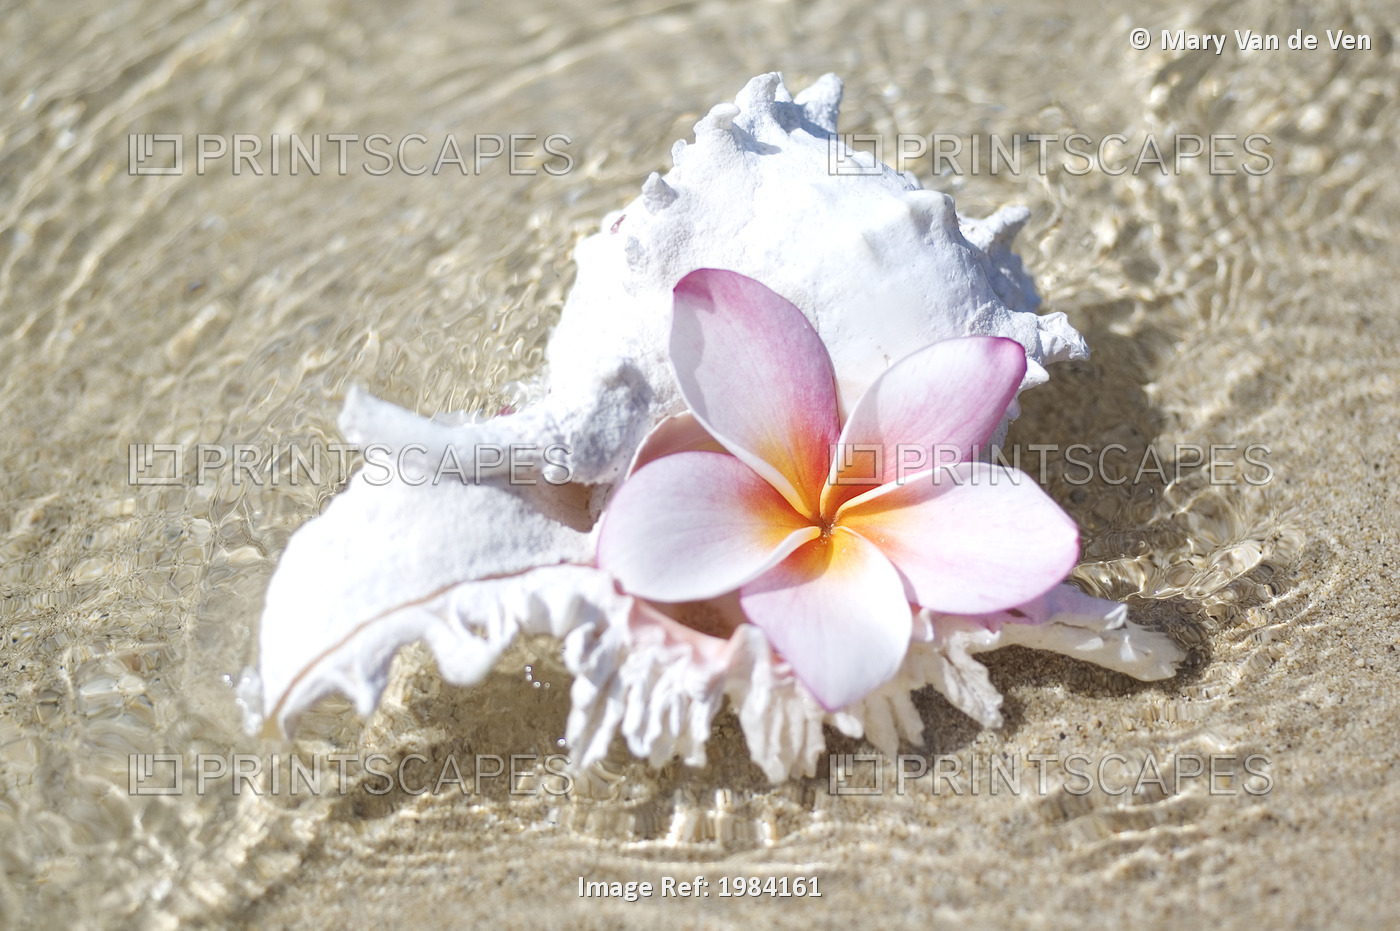 White Murex Shell In Shallow Ocean Water, With Pink Plumeria In Opening.